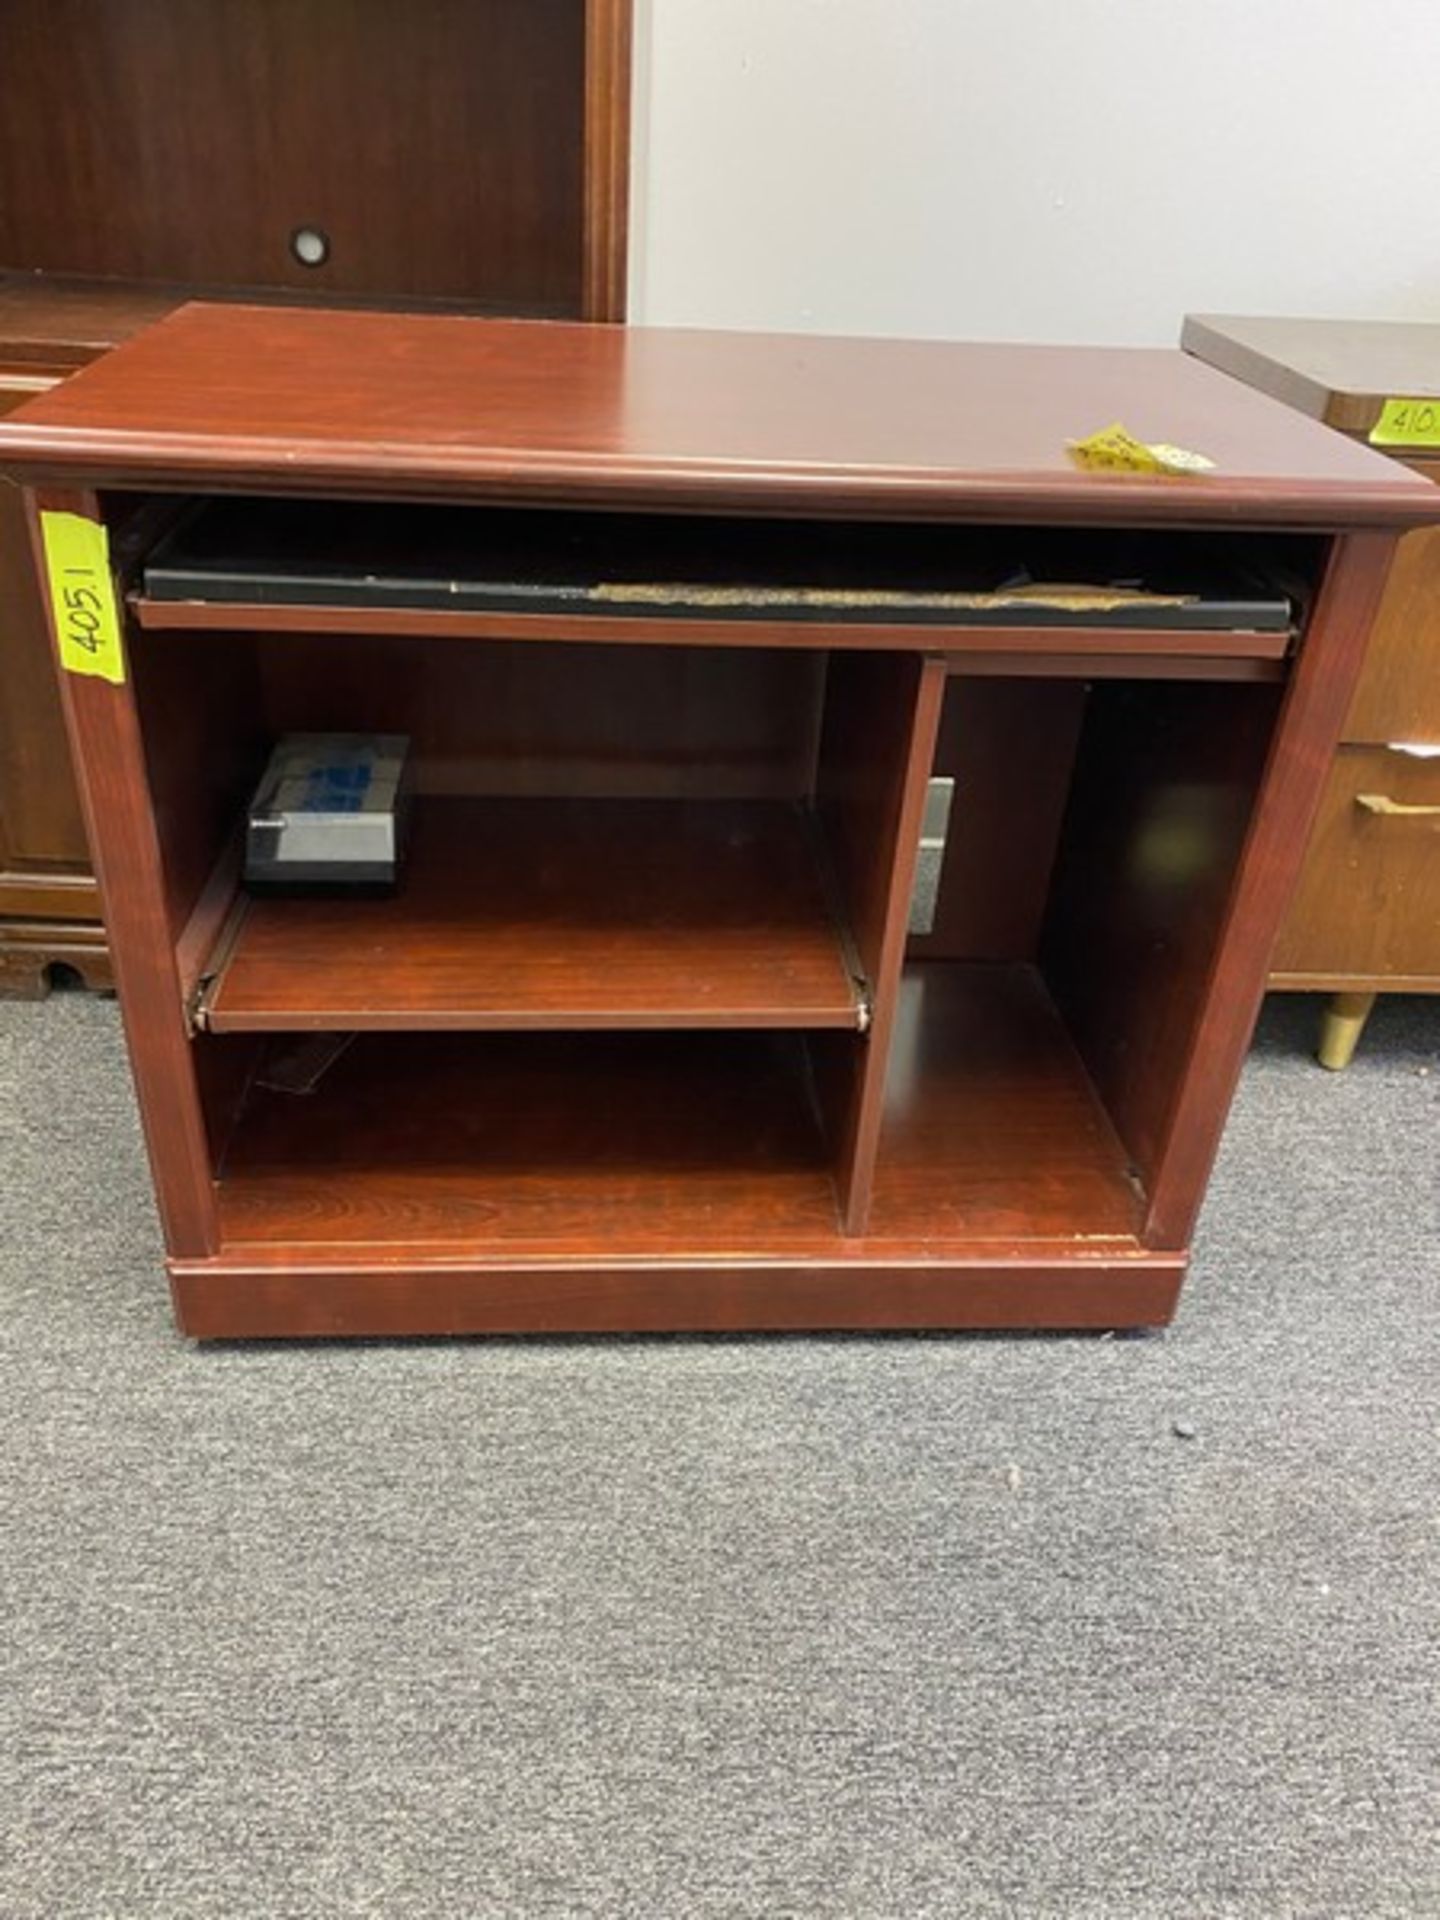 2 Wood Finish computer / printer stands on wheels 35"Wx20"Dx30"H (Elevator Handling Fee $20) ( - Image 11 of 12